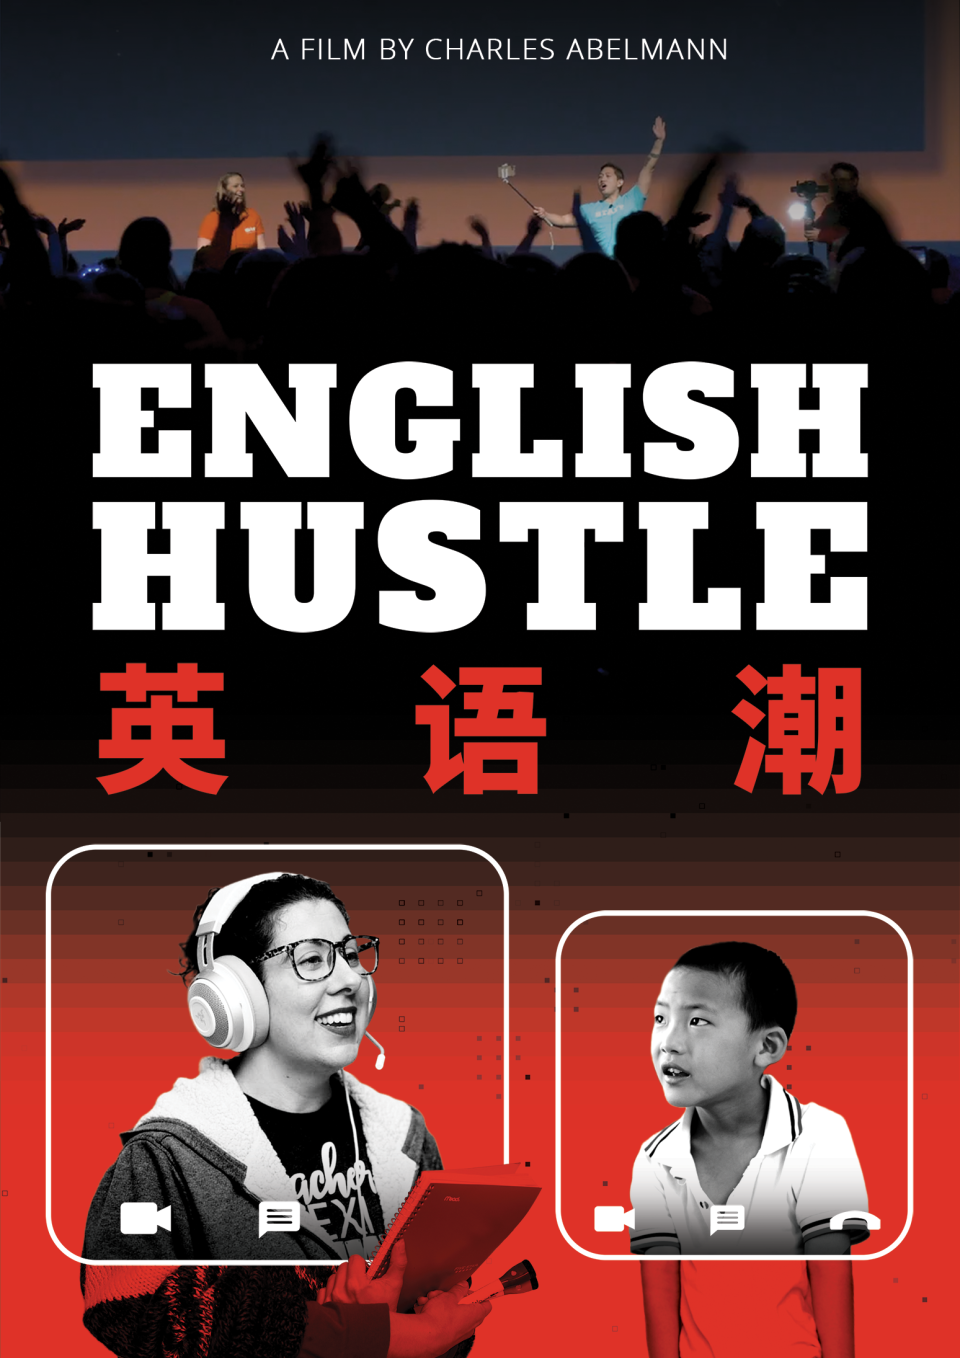 Two academic youth are in square boxes at the bottom of this poster with a red background. The background slowly transitions to black as it moves up the page where the title in English and Chinese is written.